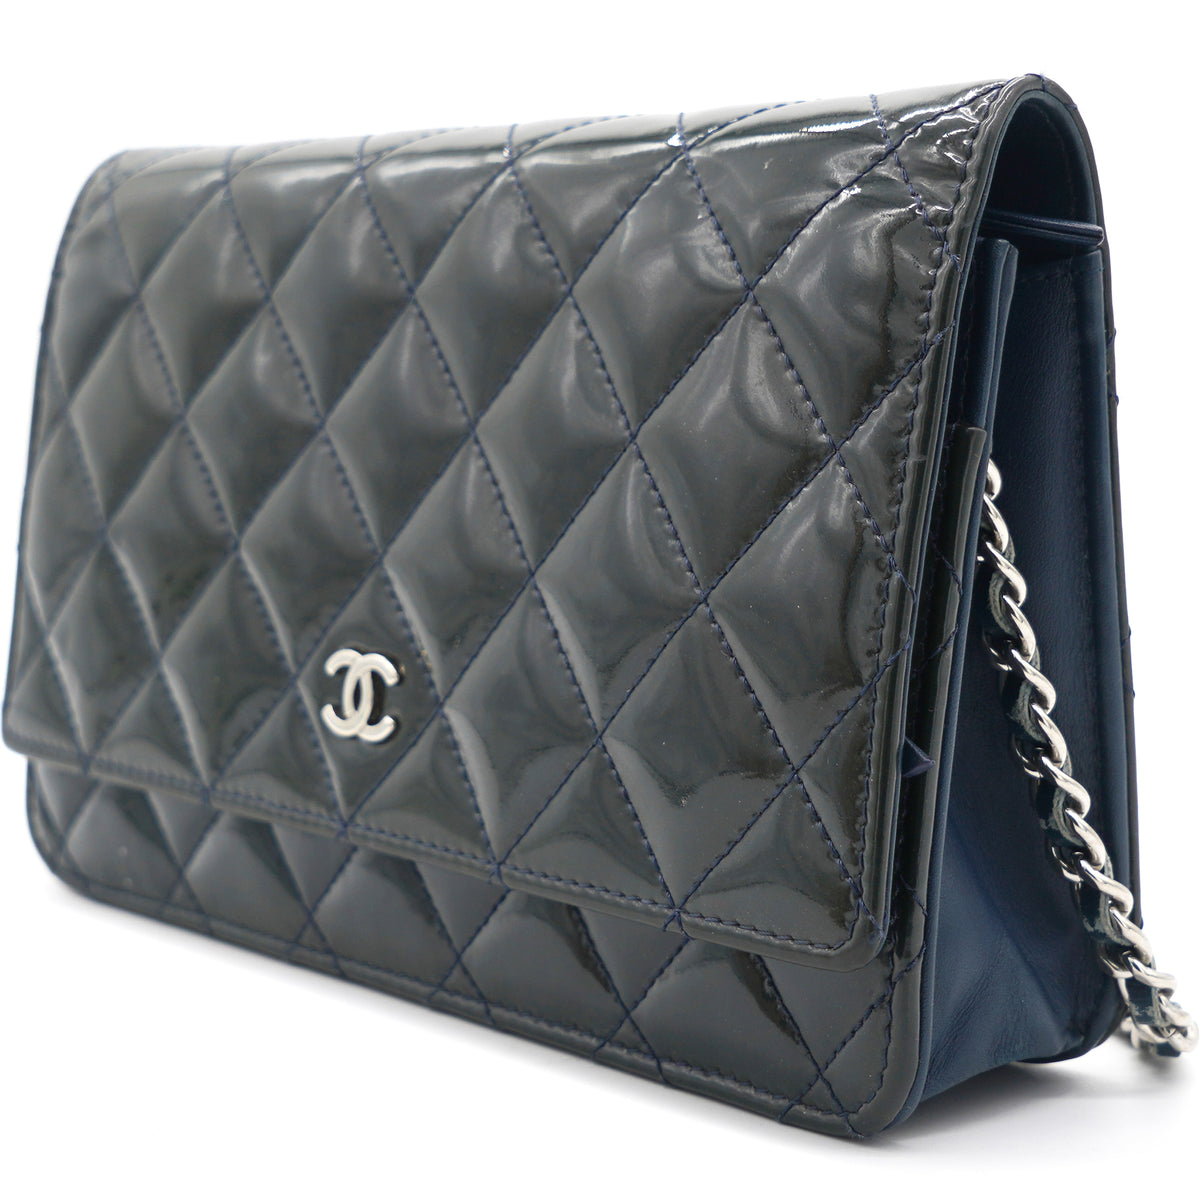 Chanel Black Crinkled Patent Leather WOC Wallet on Chain